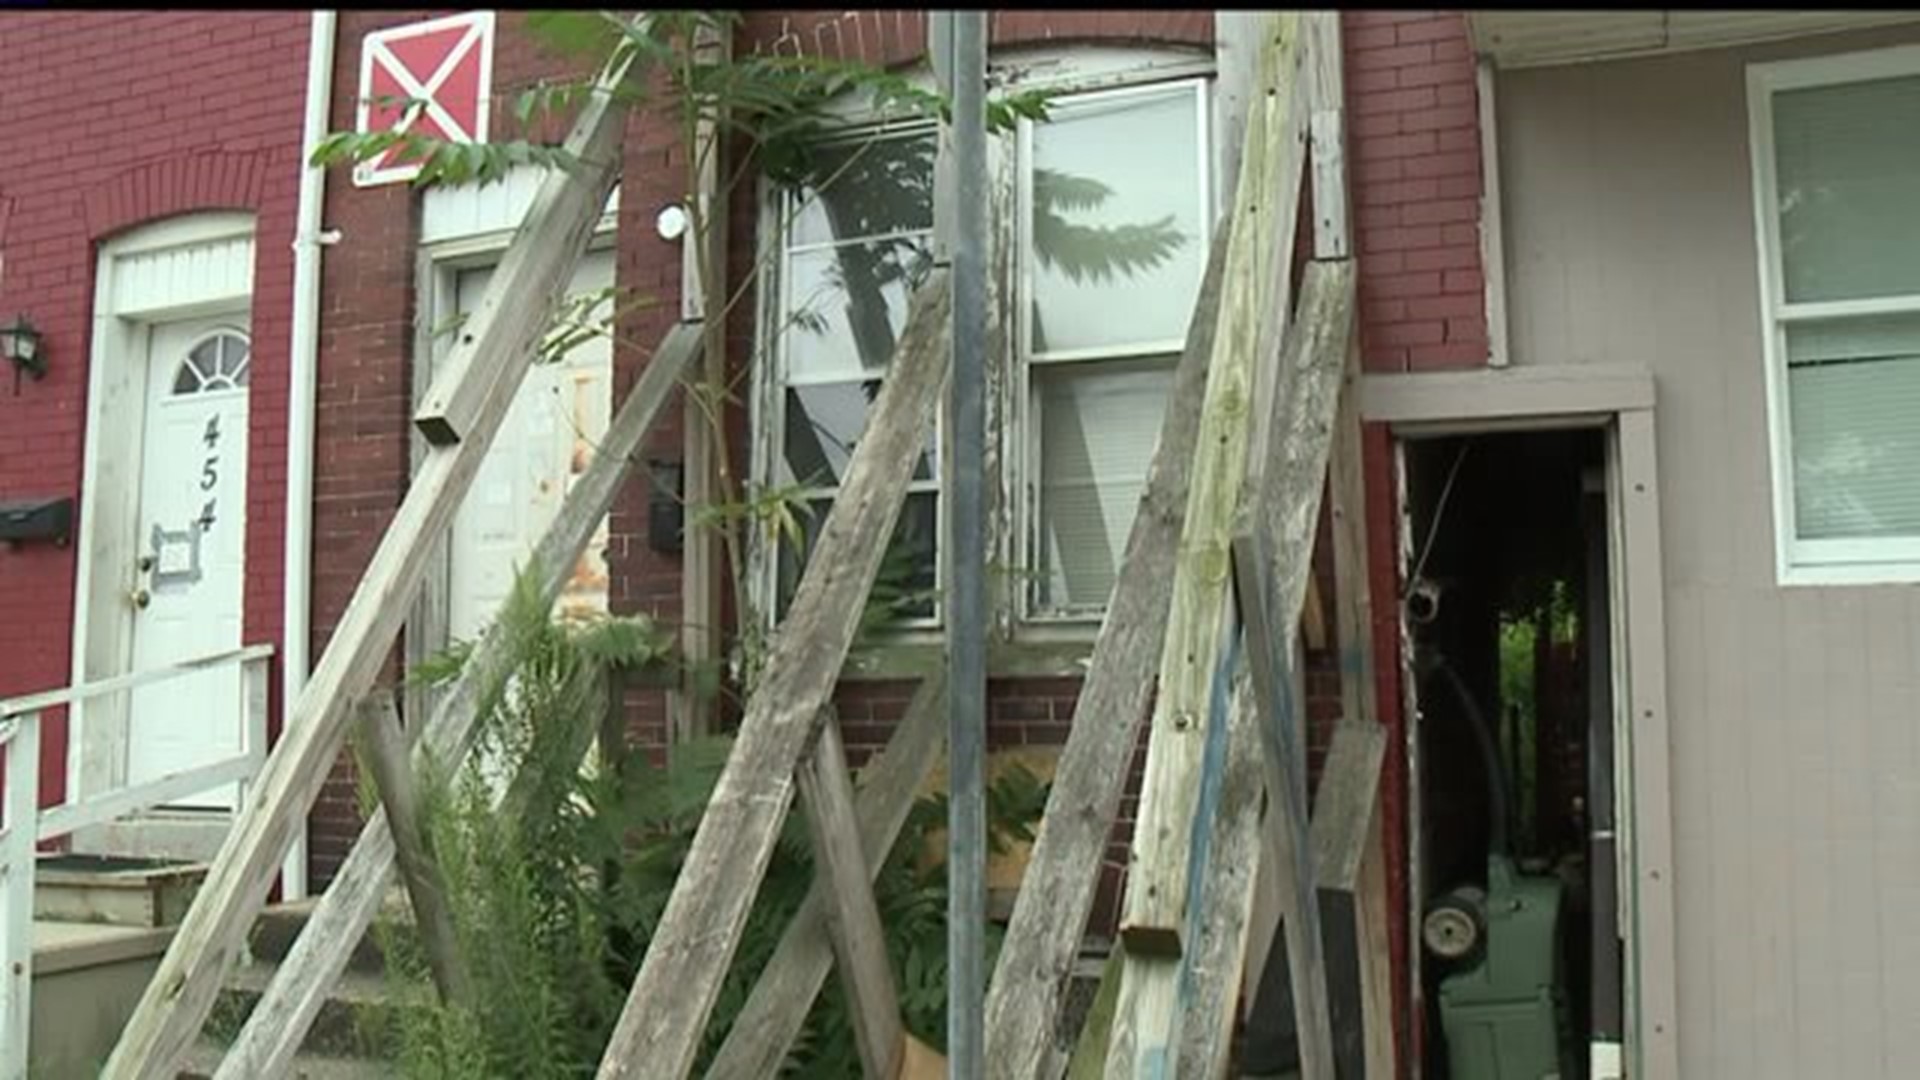 Resident urges city to fix blighted home